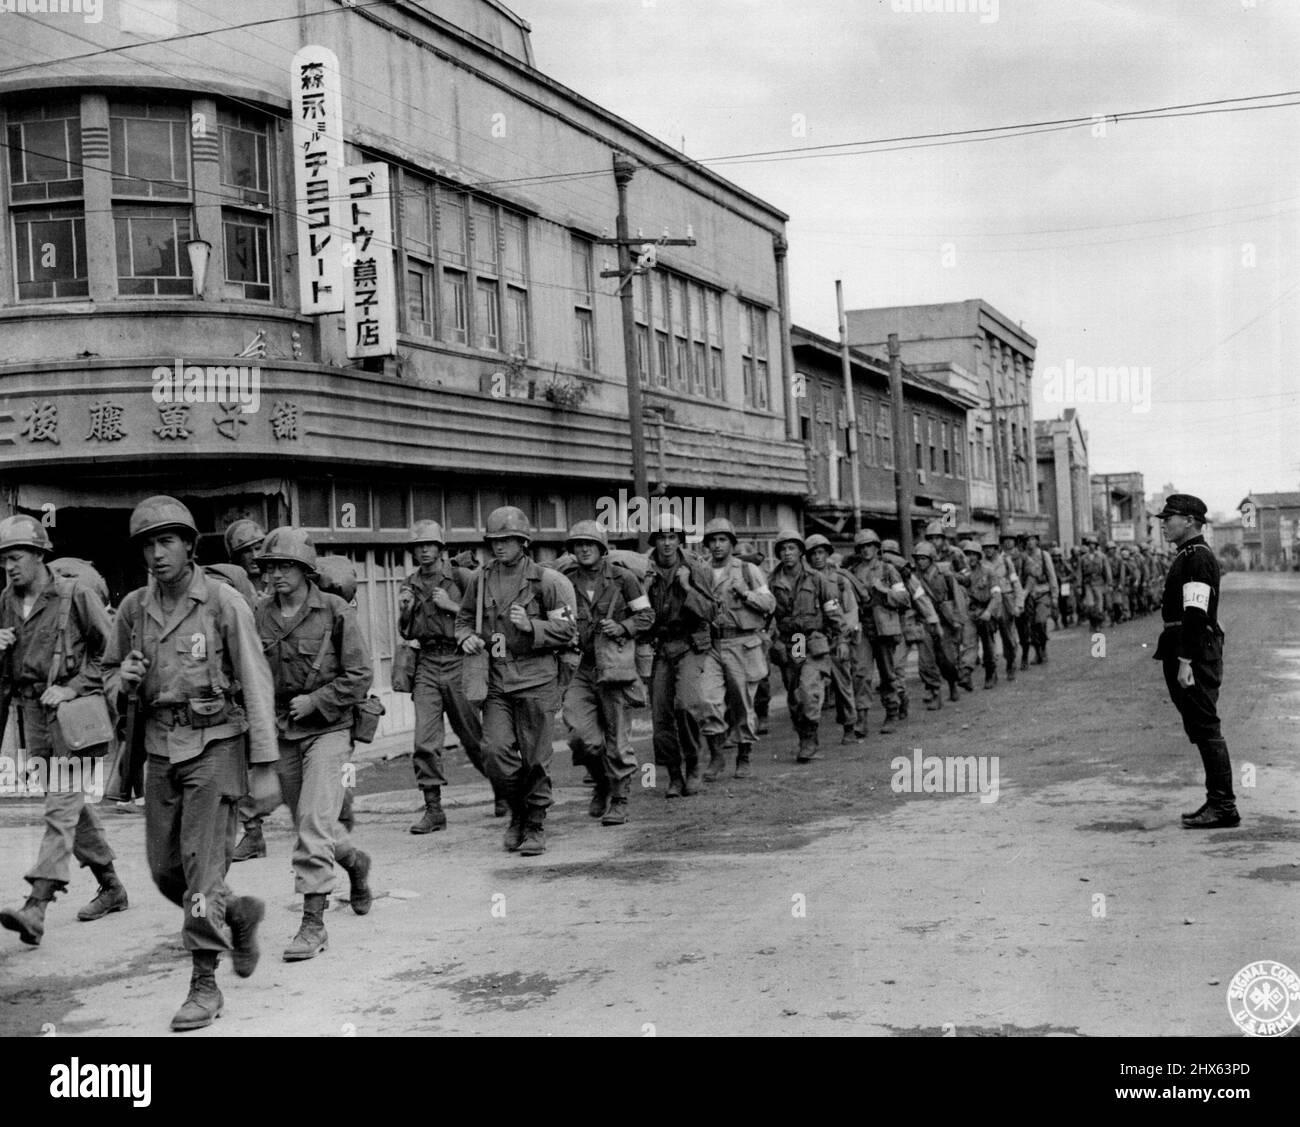 Occupation troops, of the 81st Infantry Division, march into Hirosaki, nead Aomori, Japan, with a Japanese policeman to guide them into the city. Scenes such as this, are typical as the American Forces' take up their zones of occupation. February 25, 1946. (Photo by US Signal Corps Photo). Stock Photo